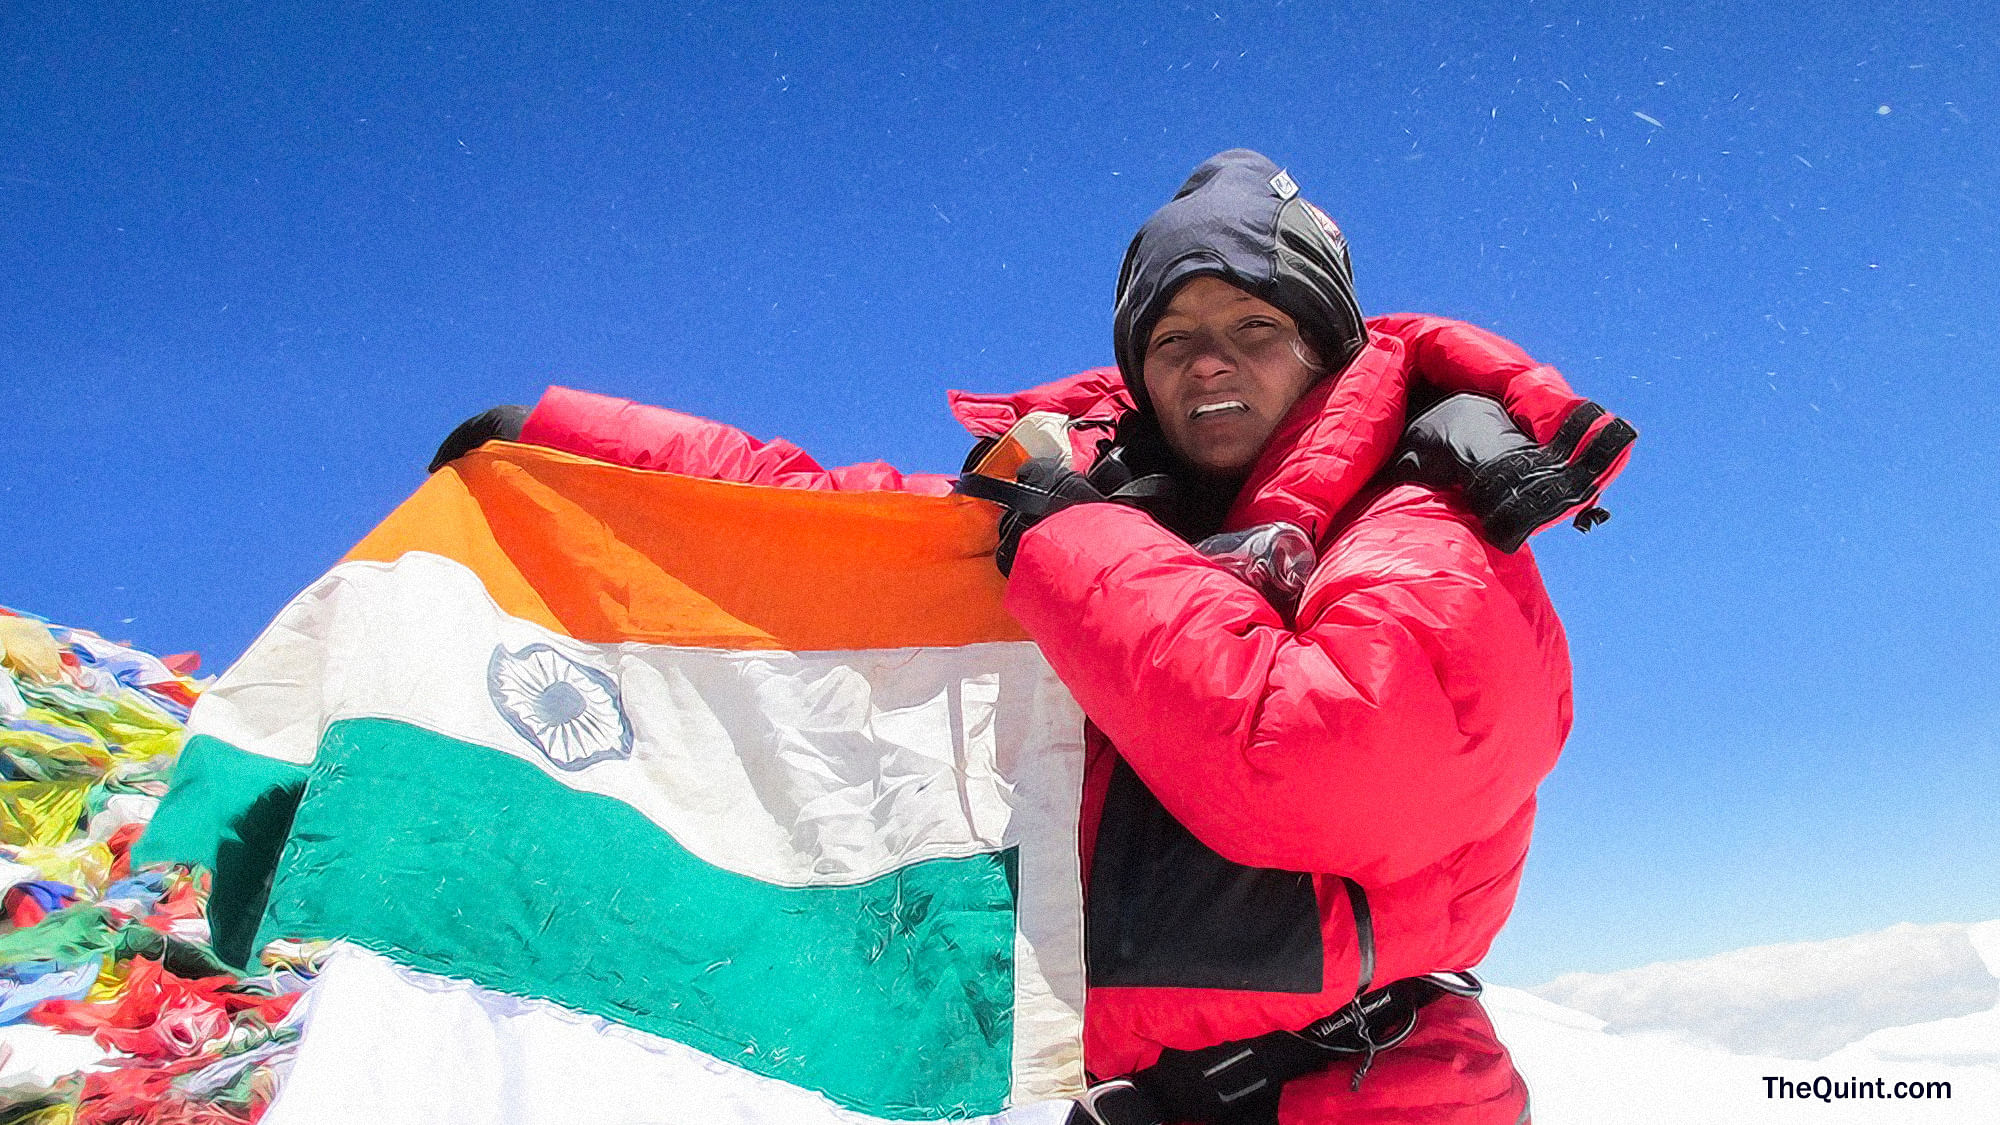 A single-amputee, Arunima Sinha has battled great odds to conquer her personal Everest